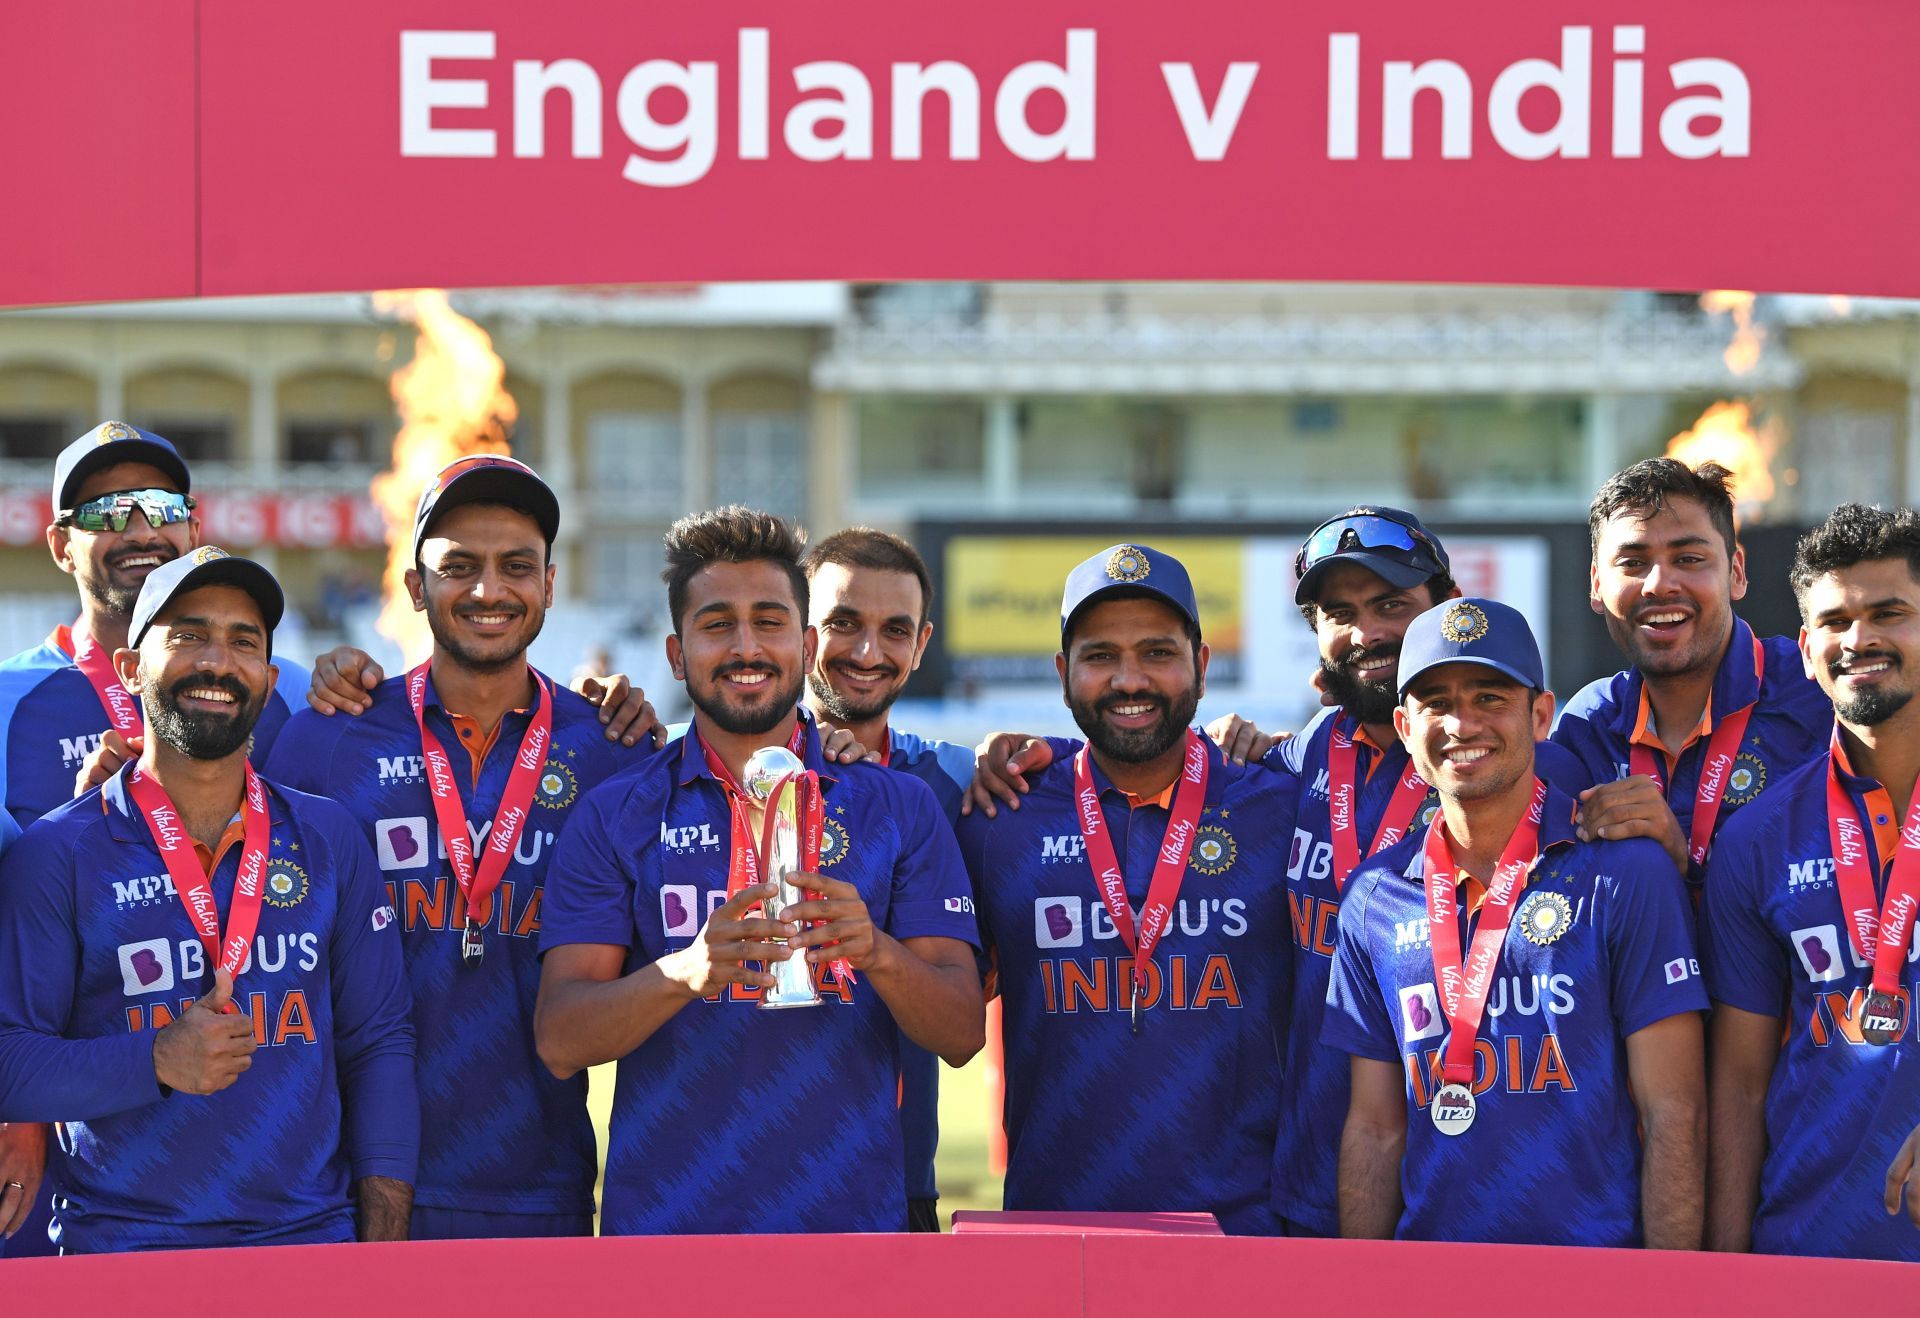 Team India with the trophy on Sunday after winning the T20I series 2-1.